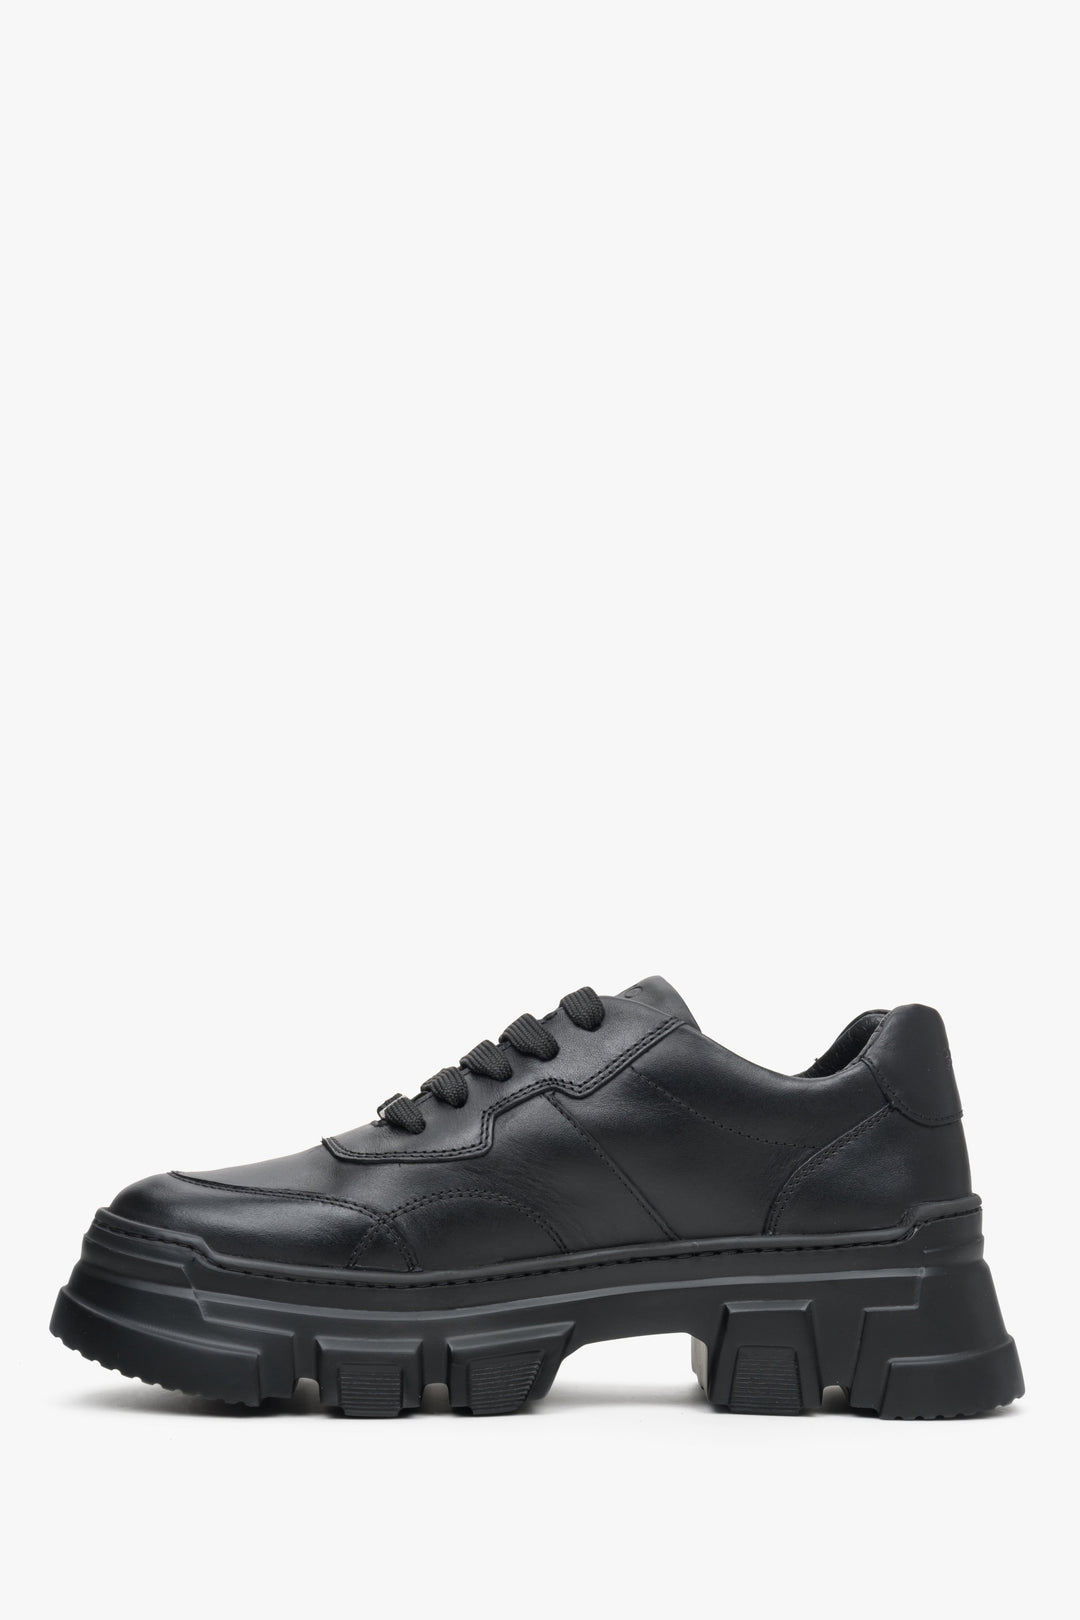 Women's black chunky sneakers by Estro for fall.